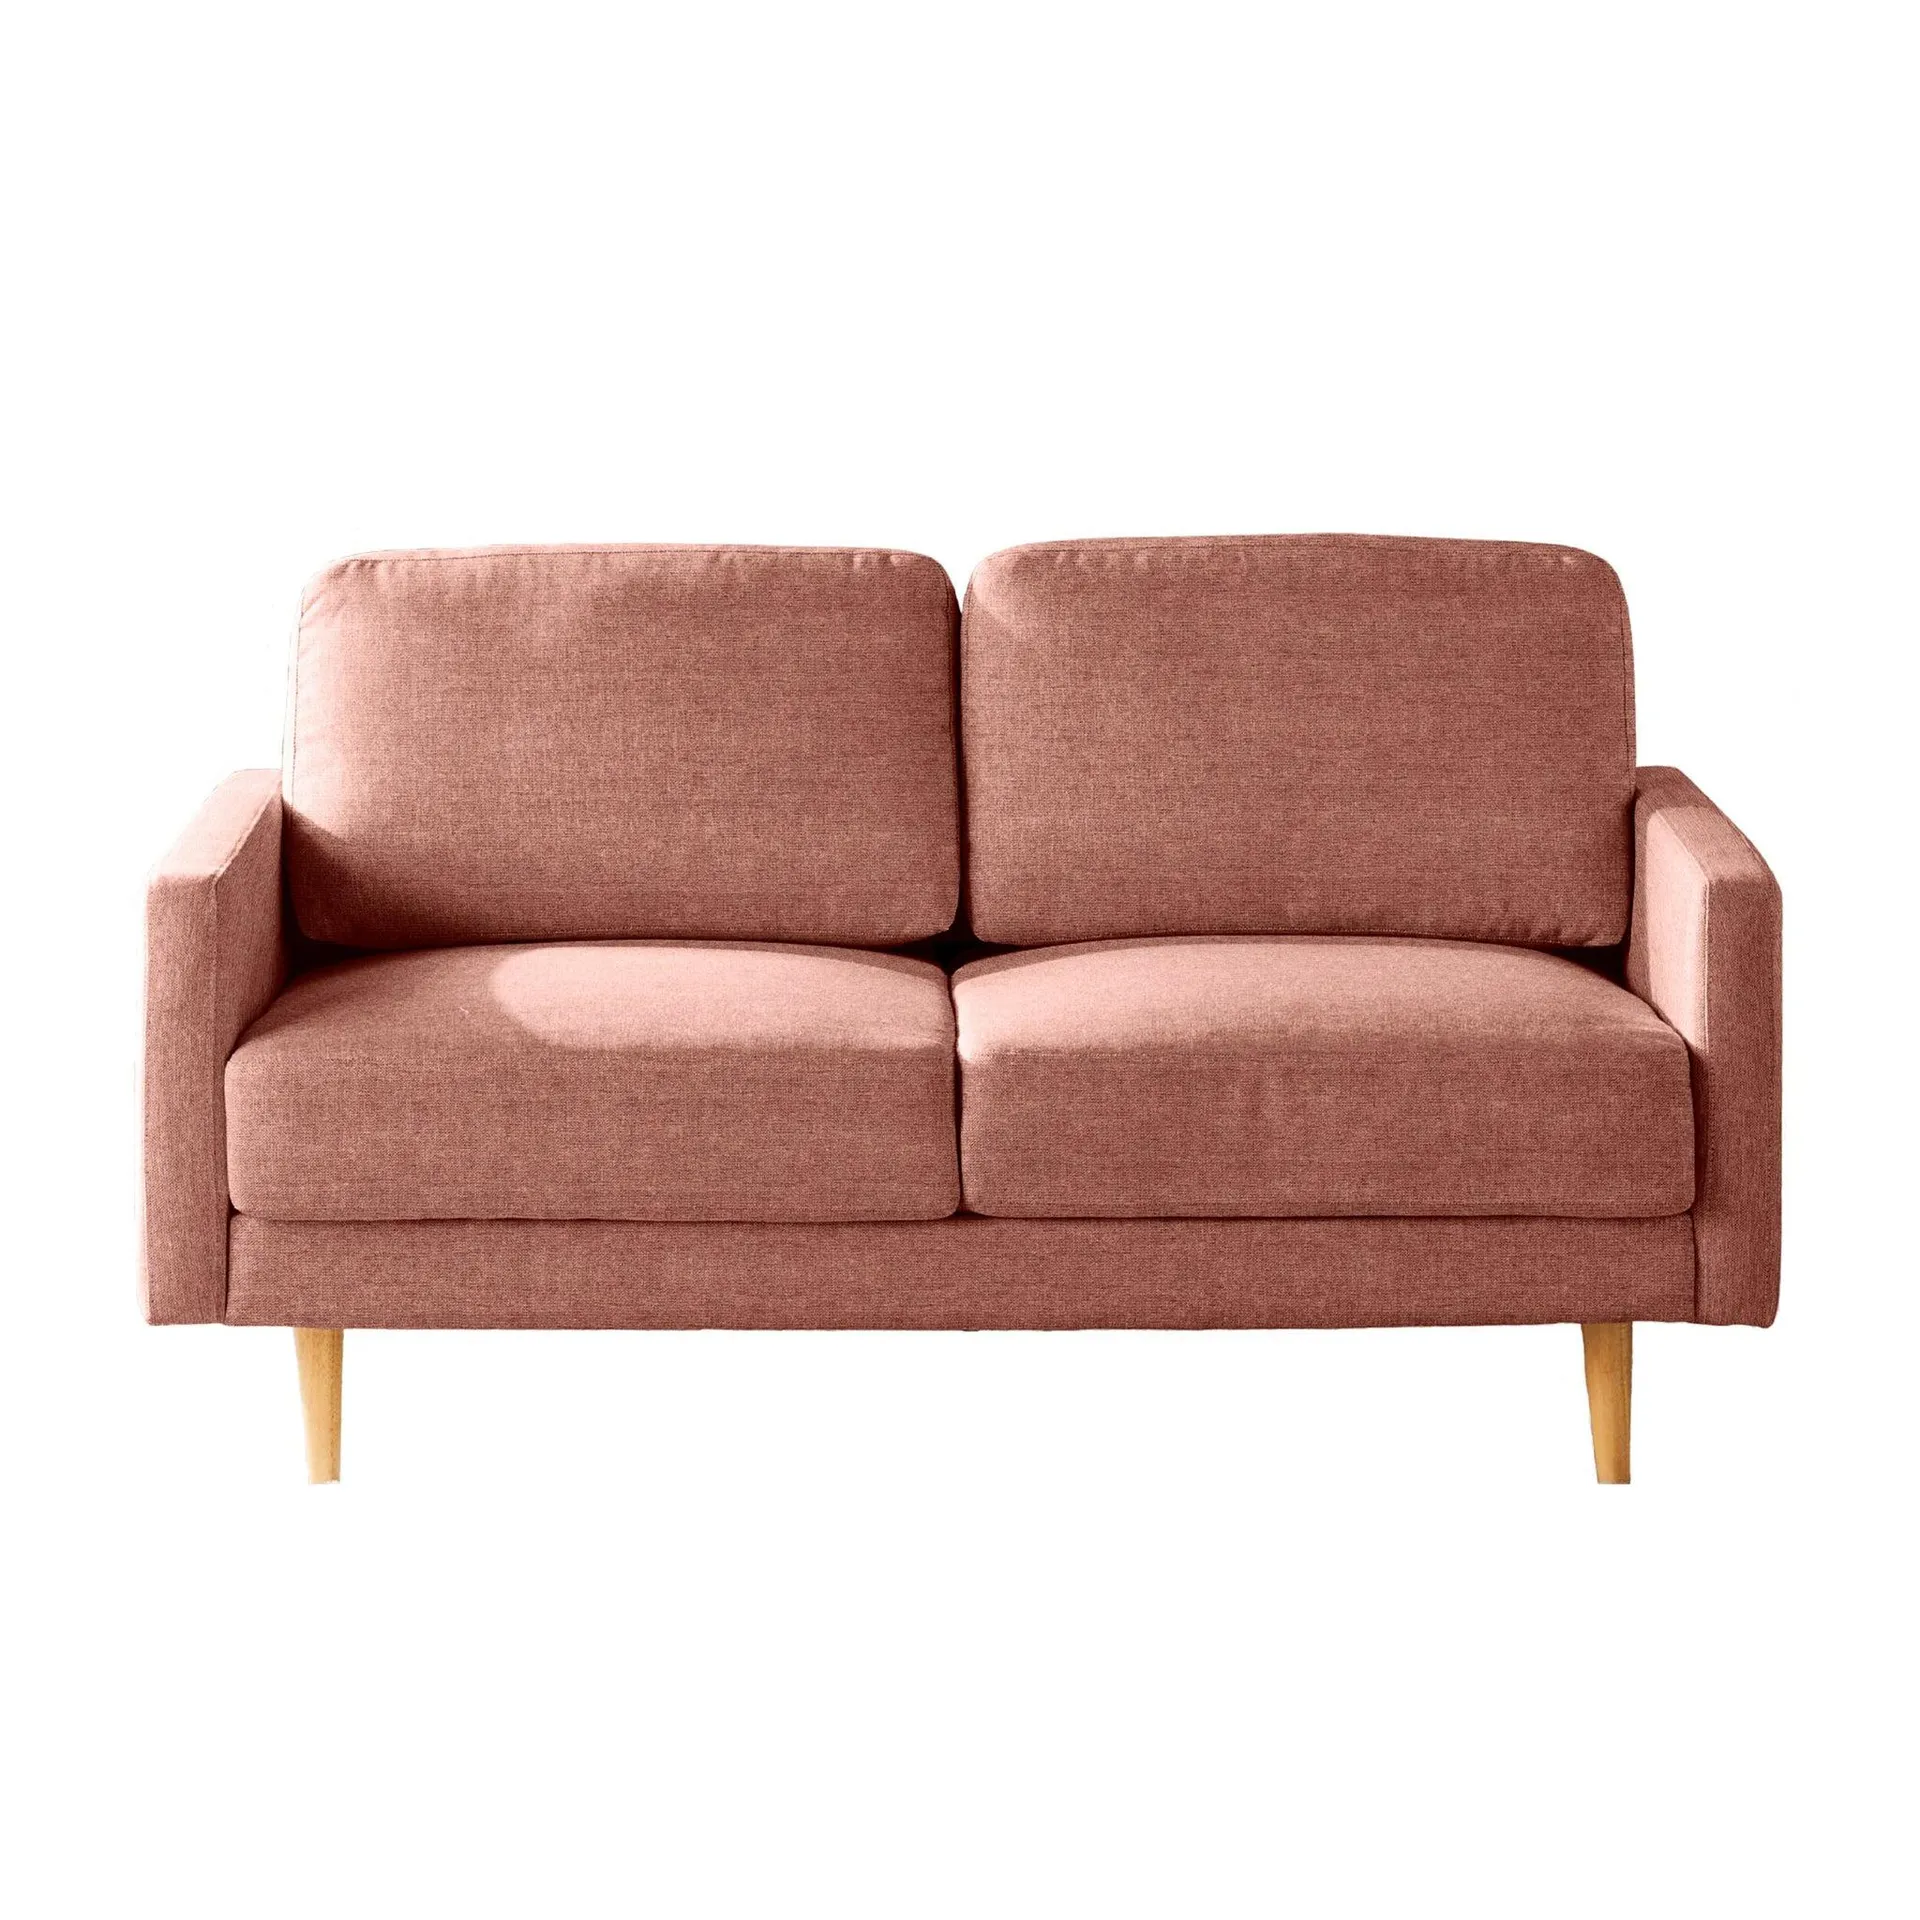 Boden 2 Seater Sofa Russet